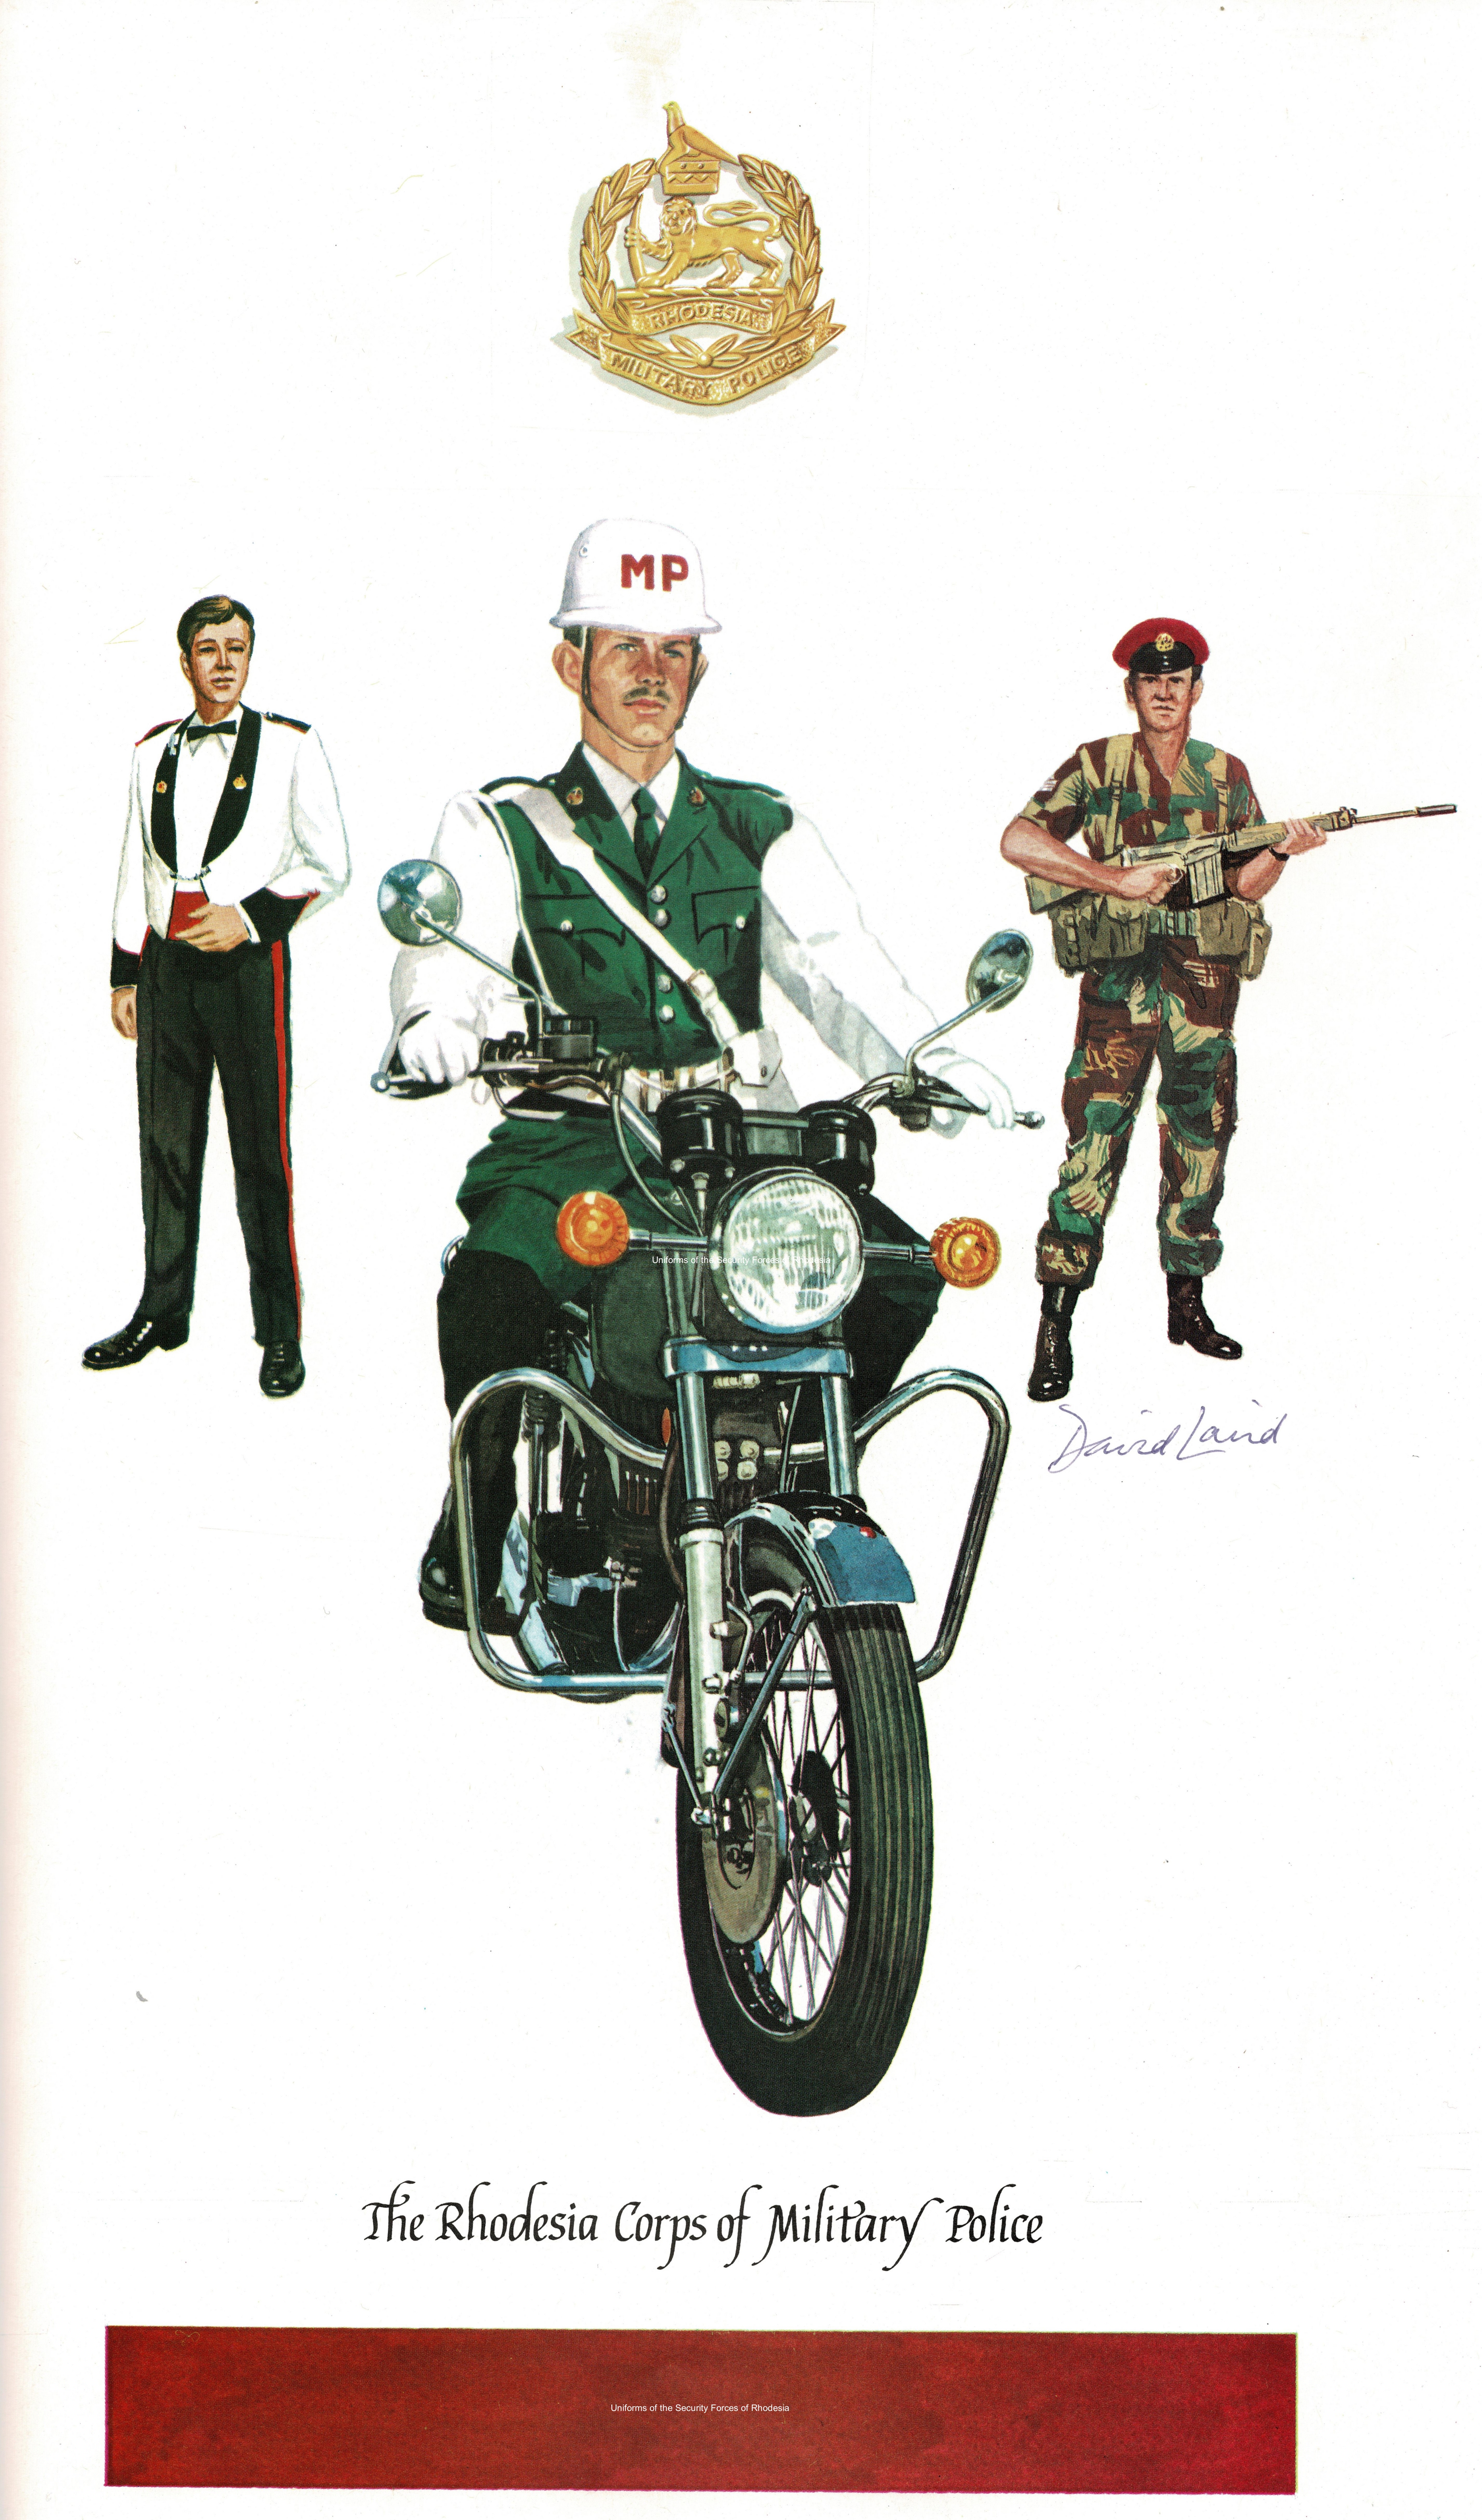 Rhodesia Corps of Military Police